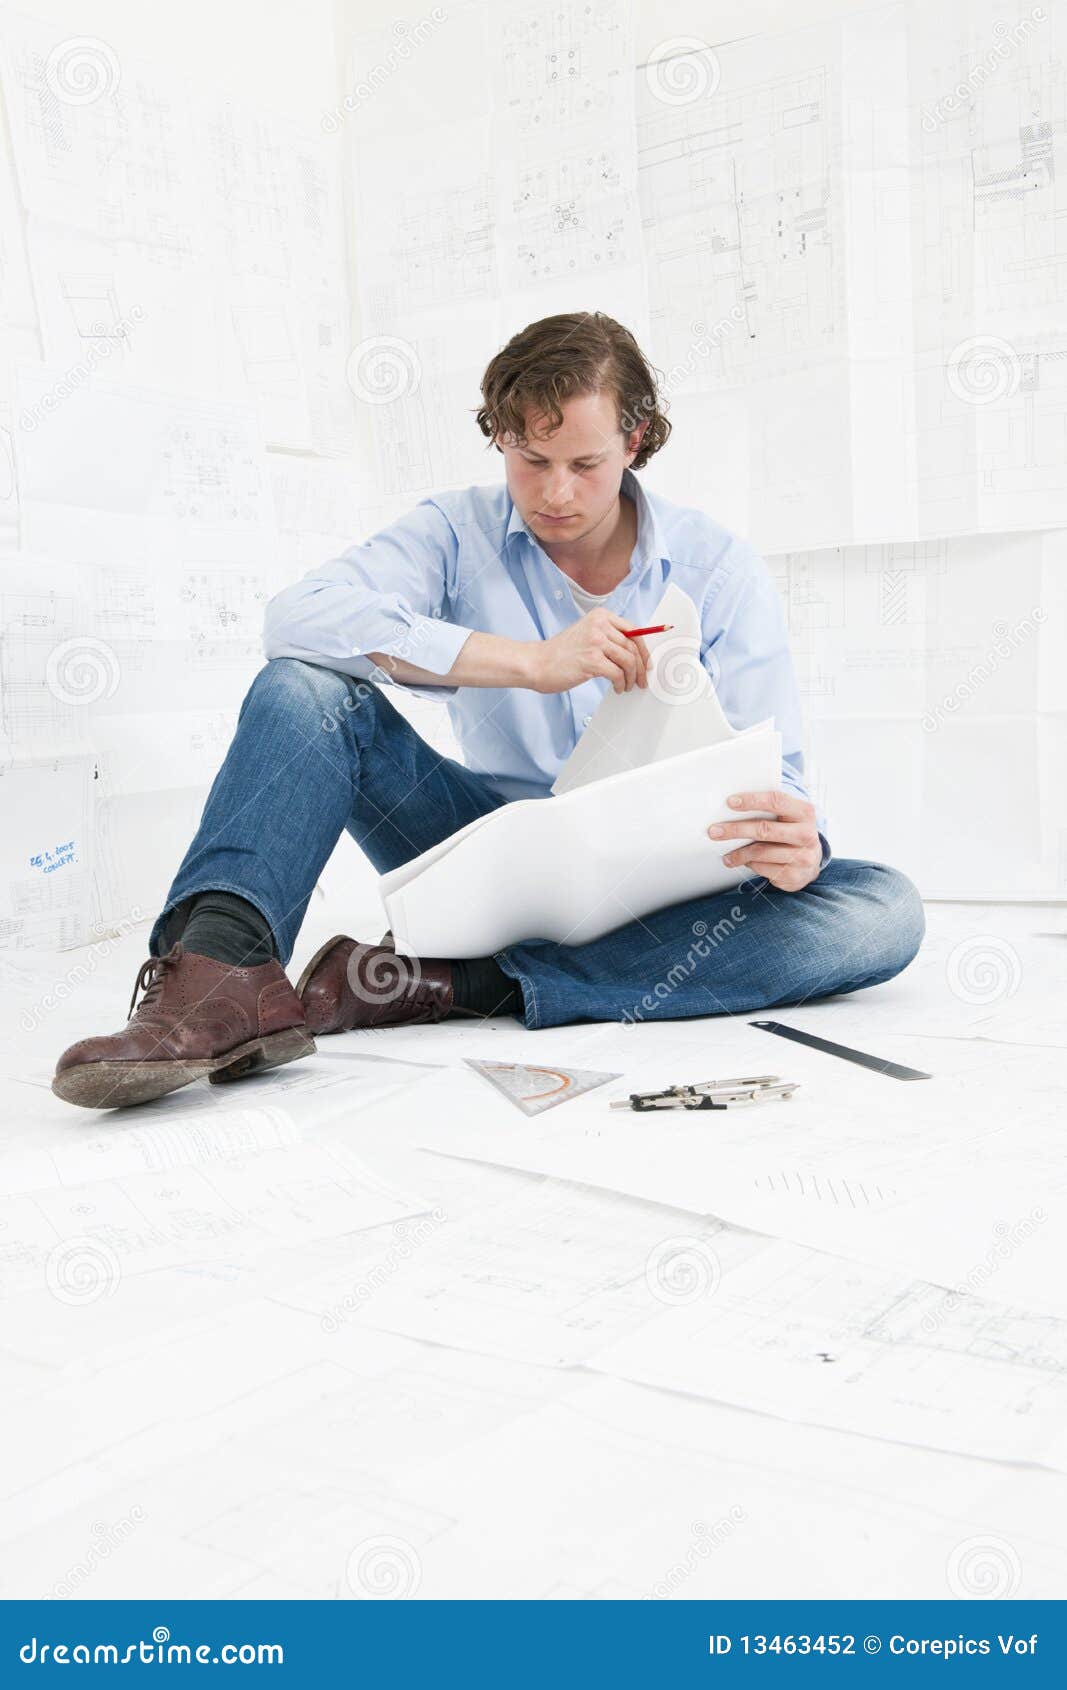 Engineer Checking Technical Drawings Stock Photo - Image of compasses